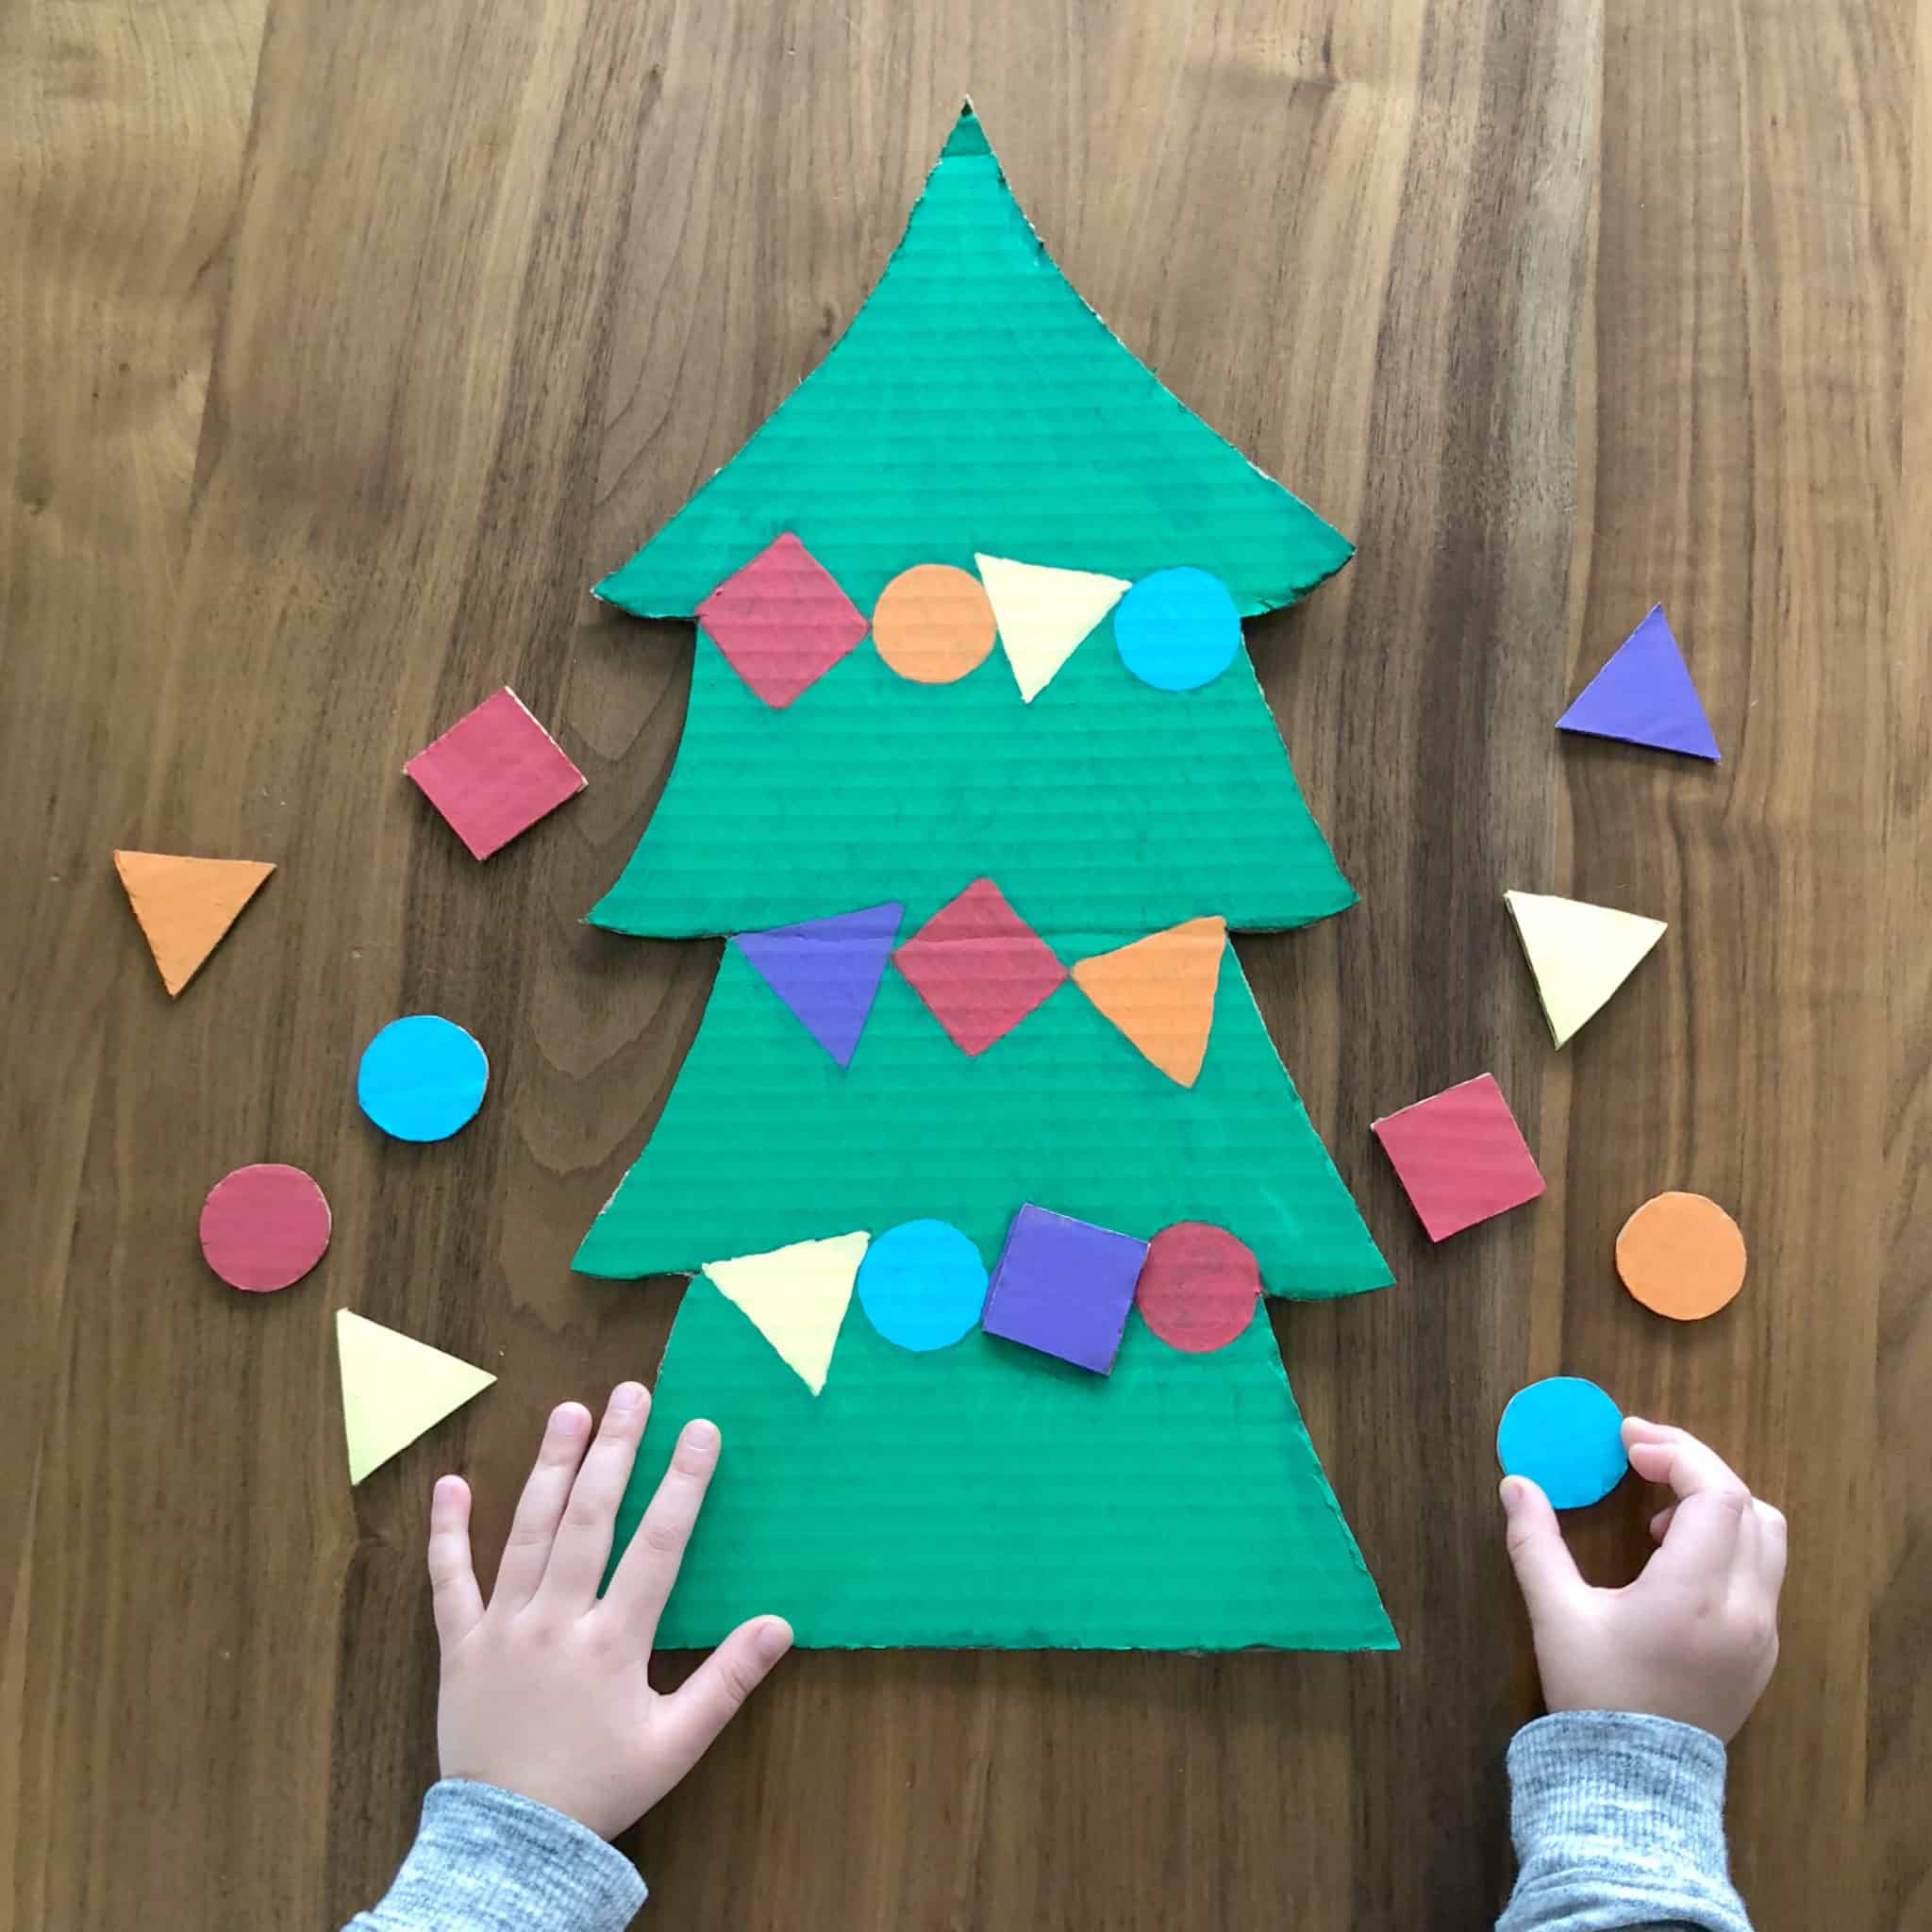 Cardboard Christmas Tree Shapes Puzzle for Toddlers!